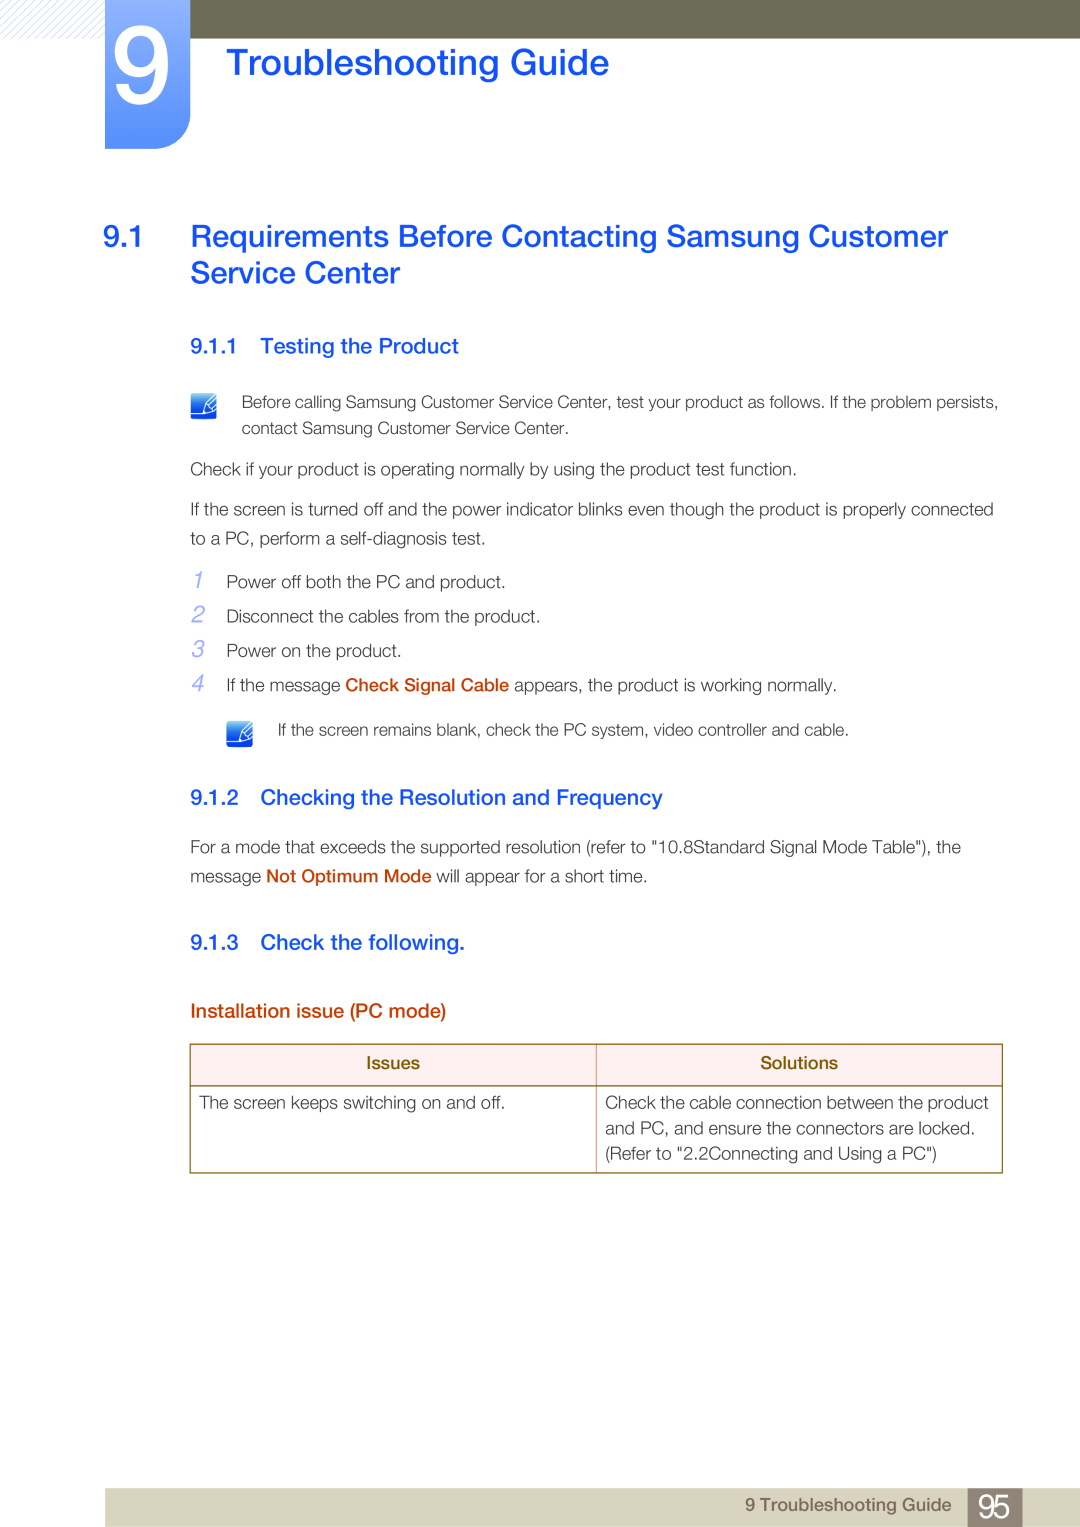 Samsung LS24E65UDWG/EN manual Troubleshooting Guide, Requirements Before Contacting Samsung Customer Service Center, Issues 